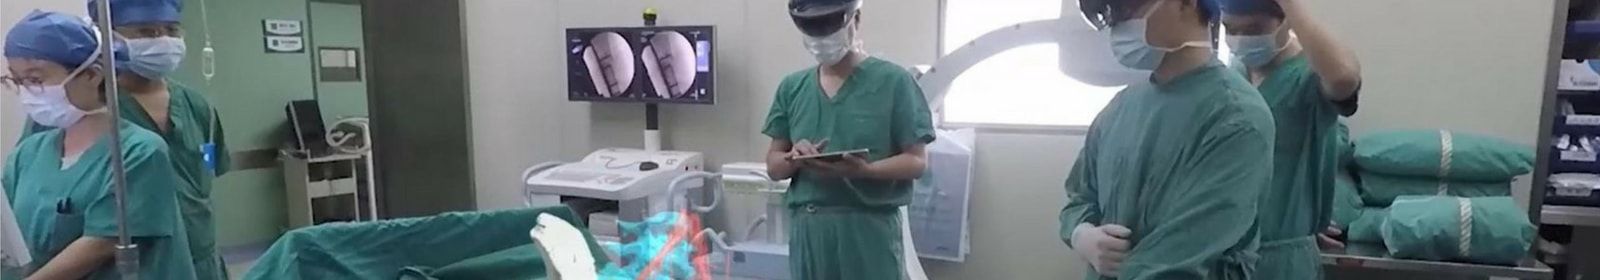 Surgeons work on a patient by using HoloLens